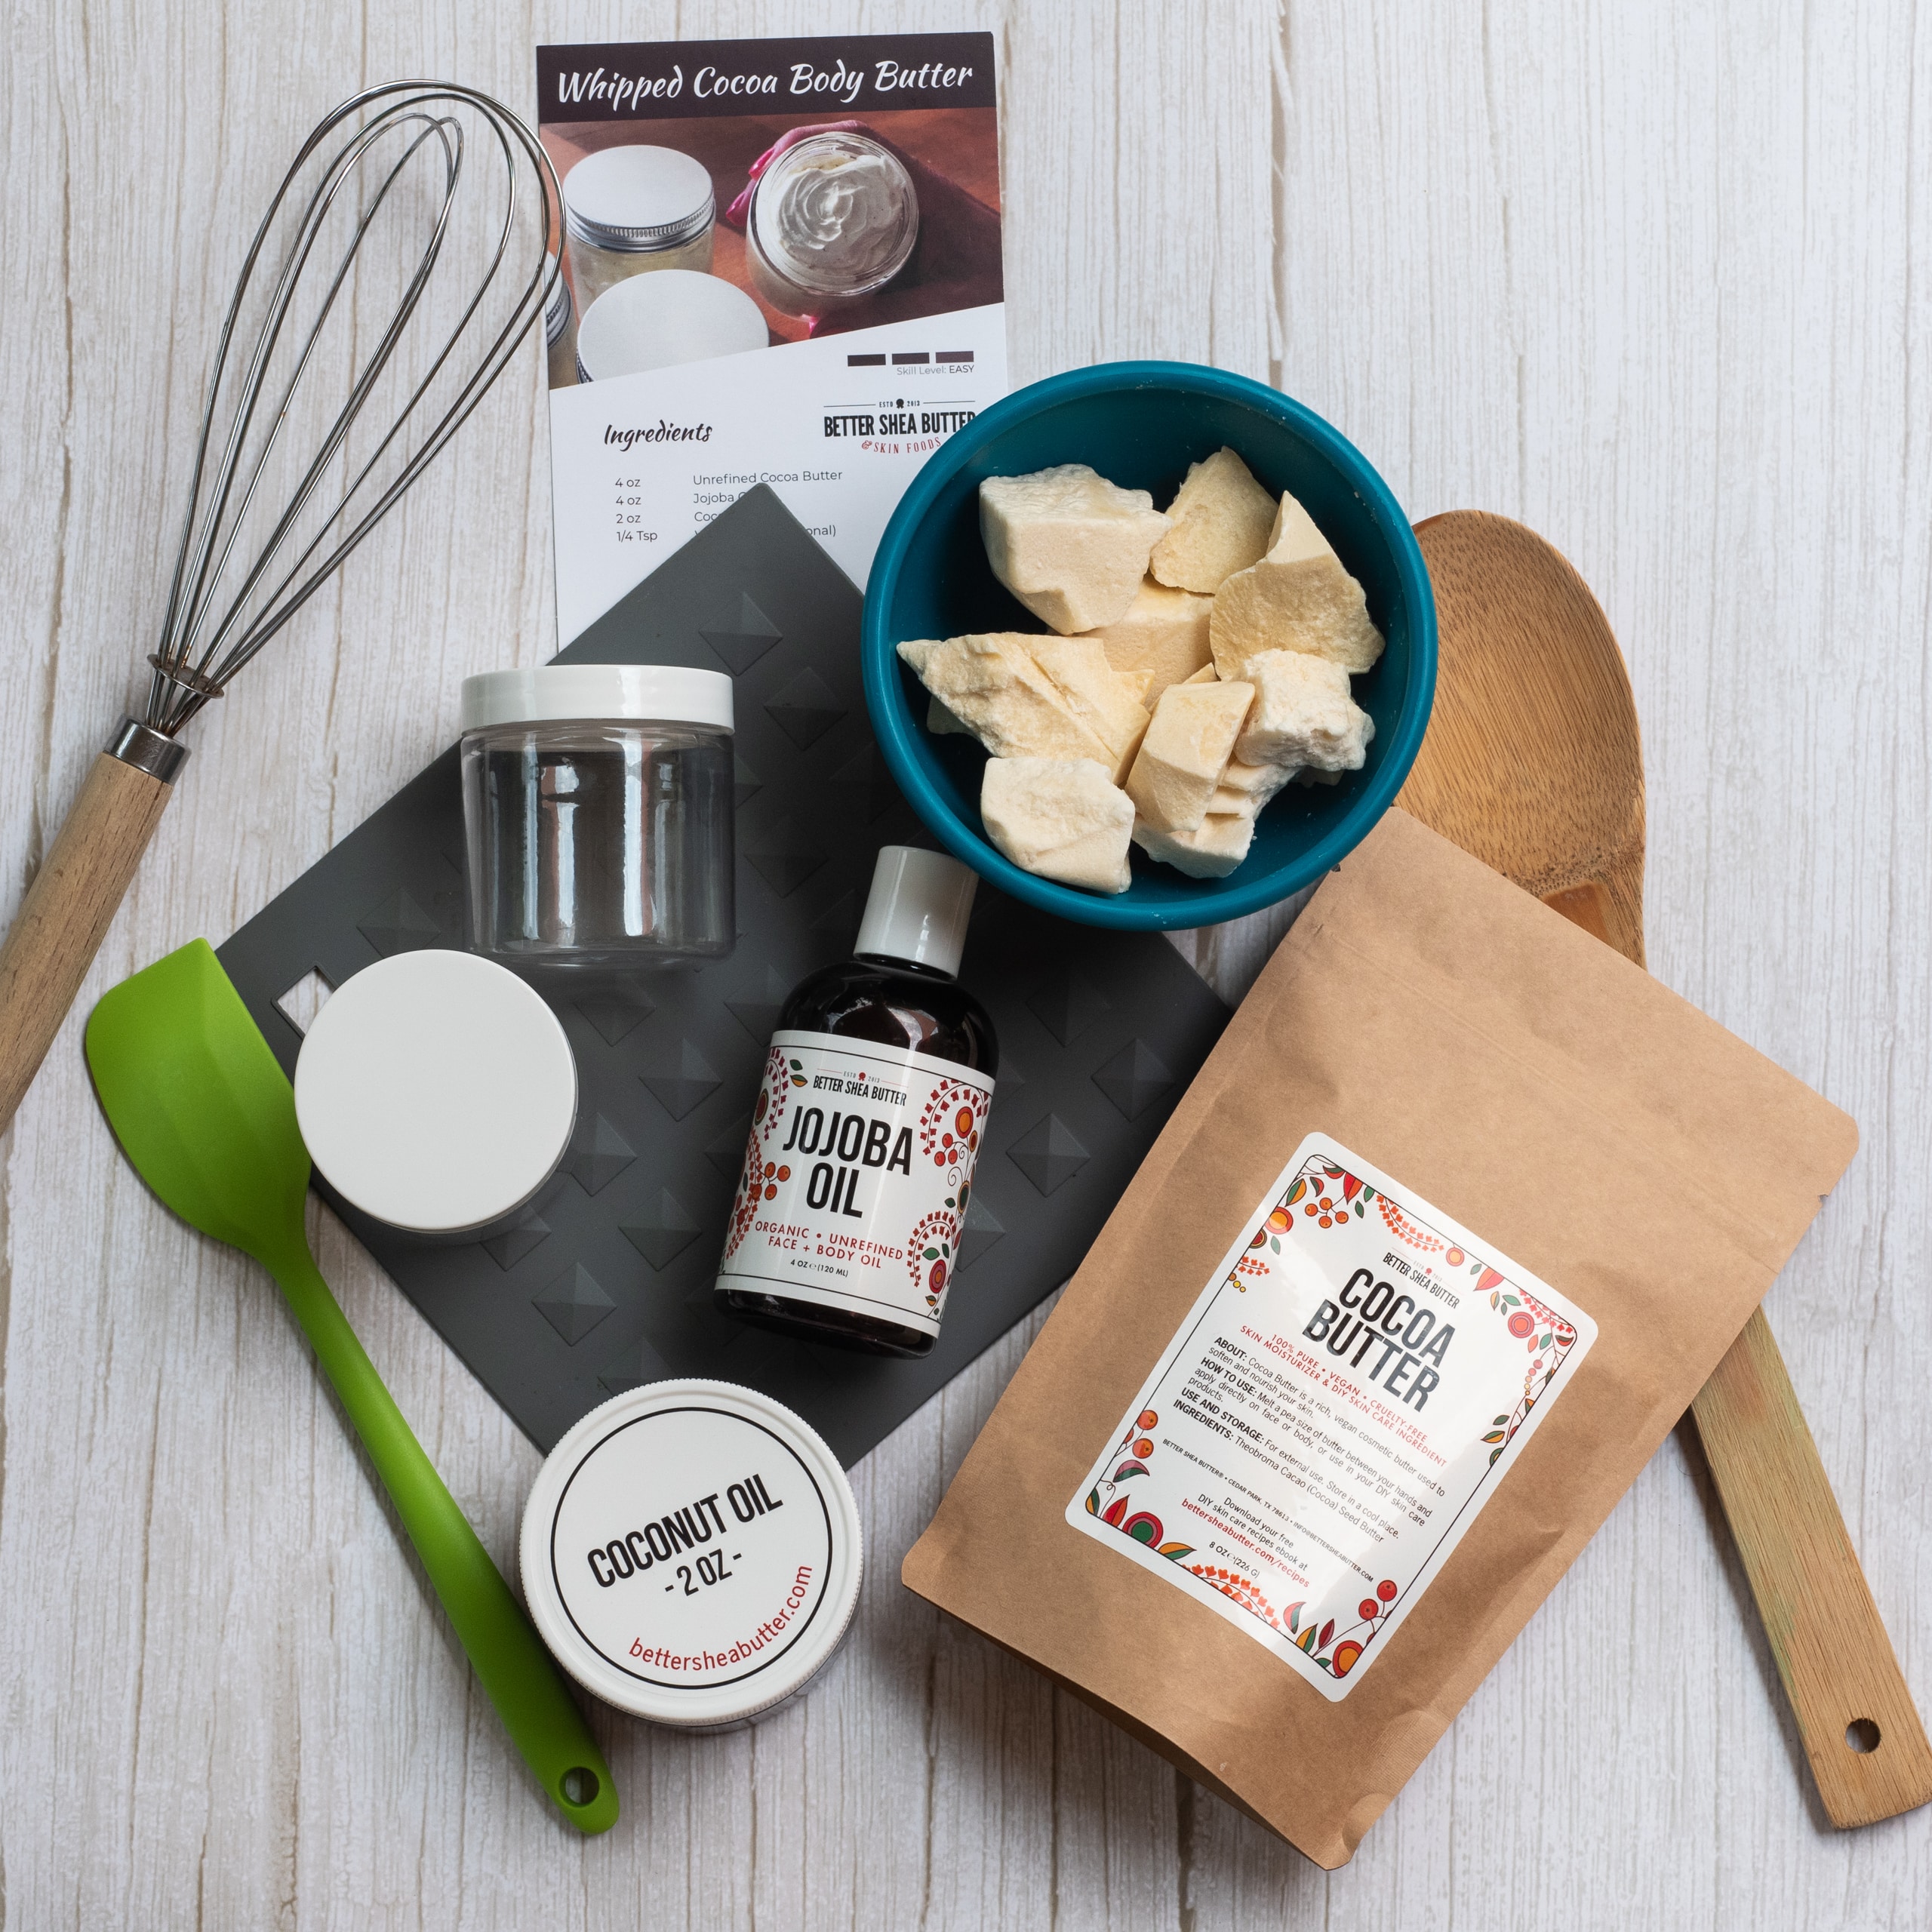 Make-your-body-butter Kit Includes Instructions and Video Tutorial Easy 